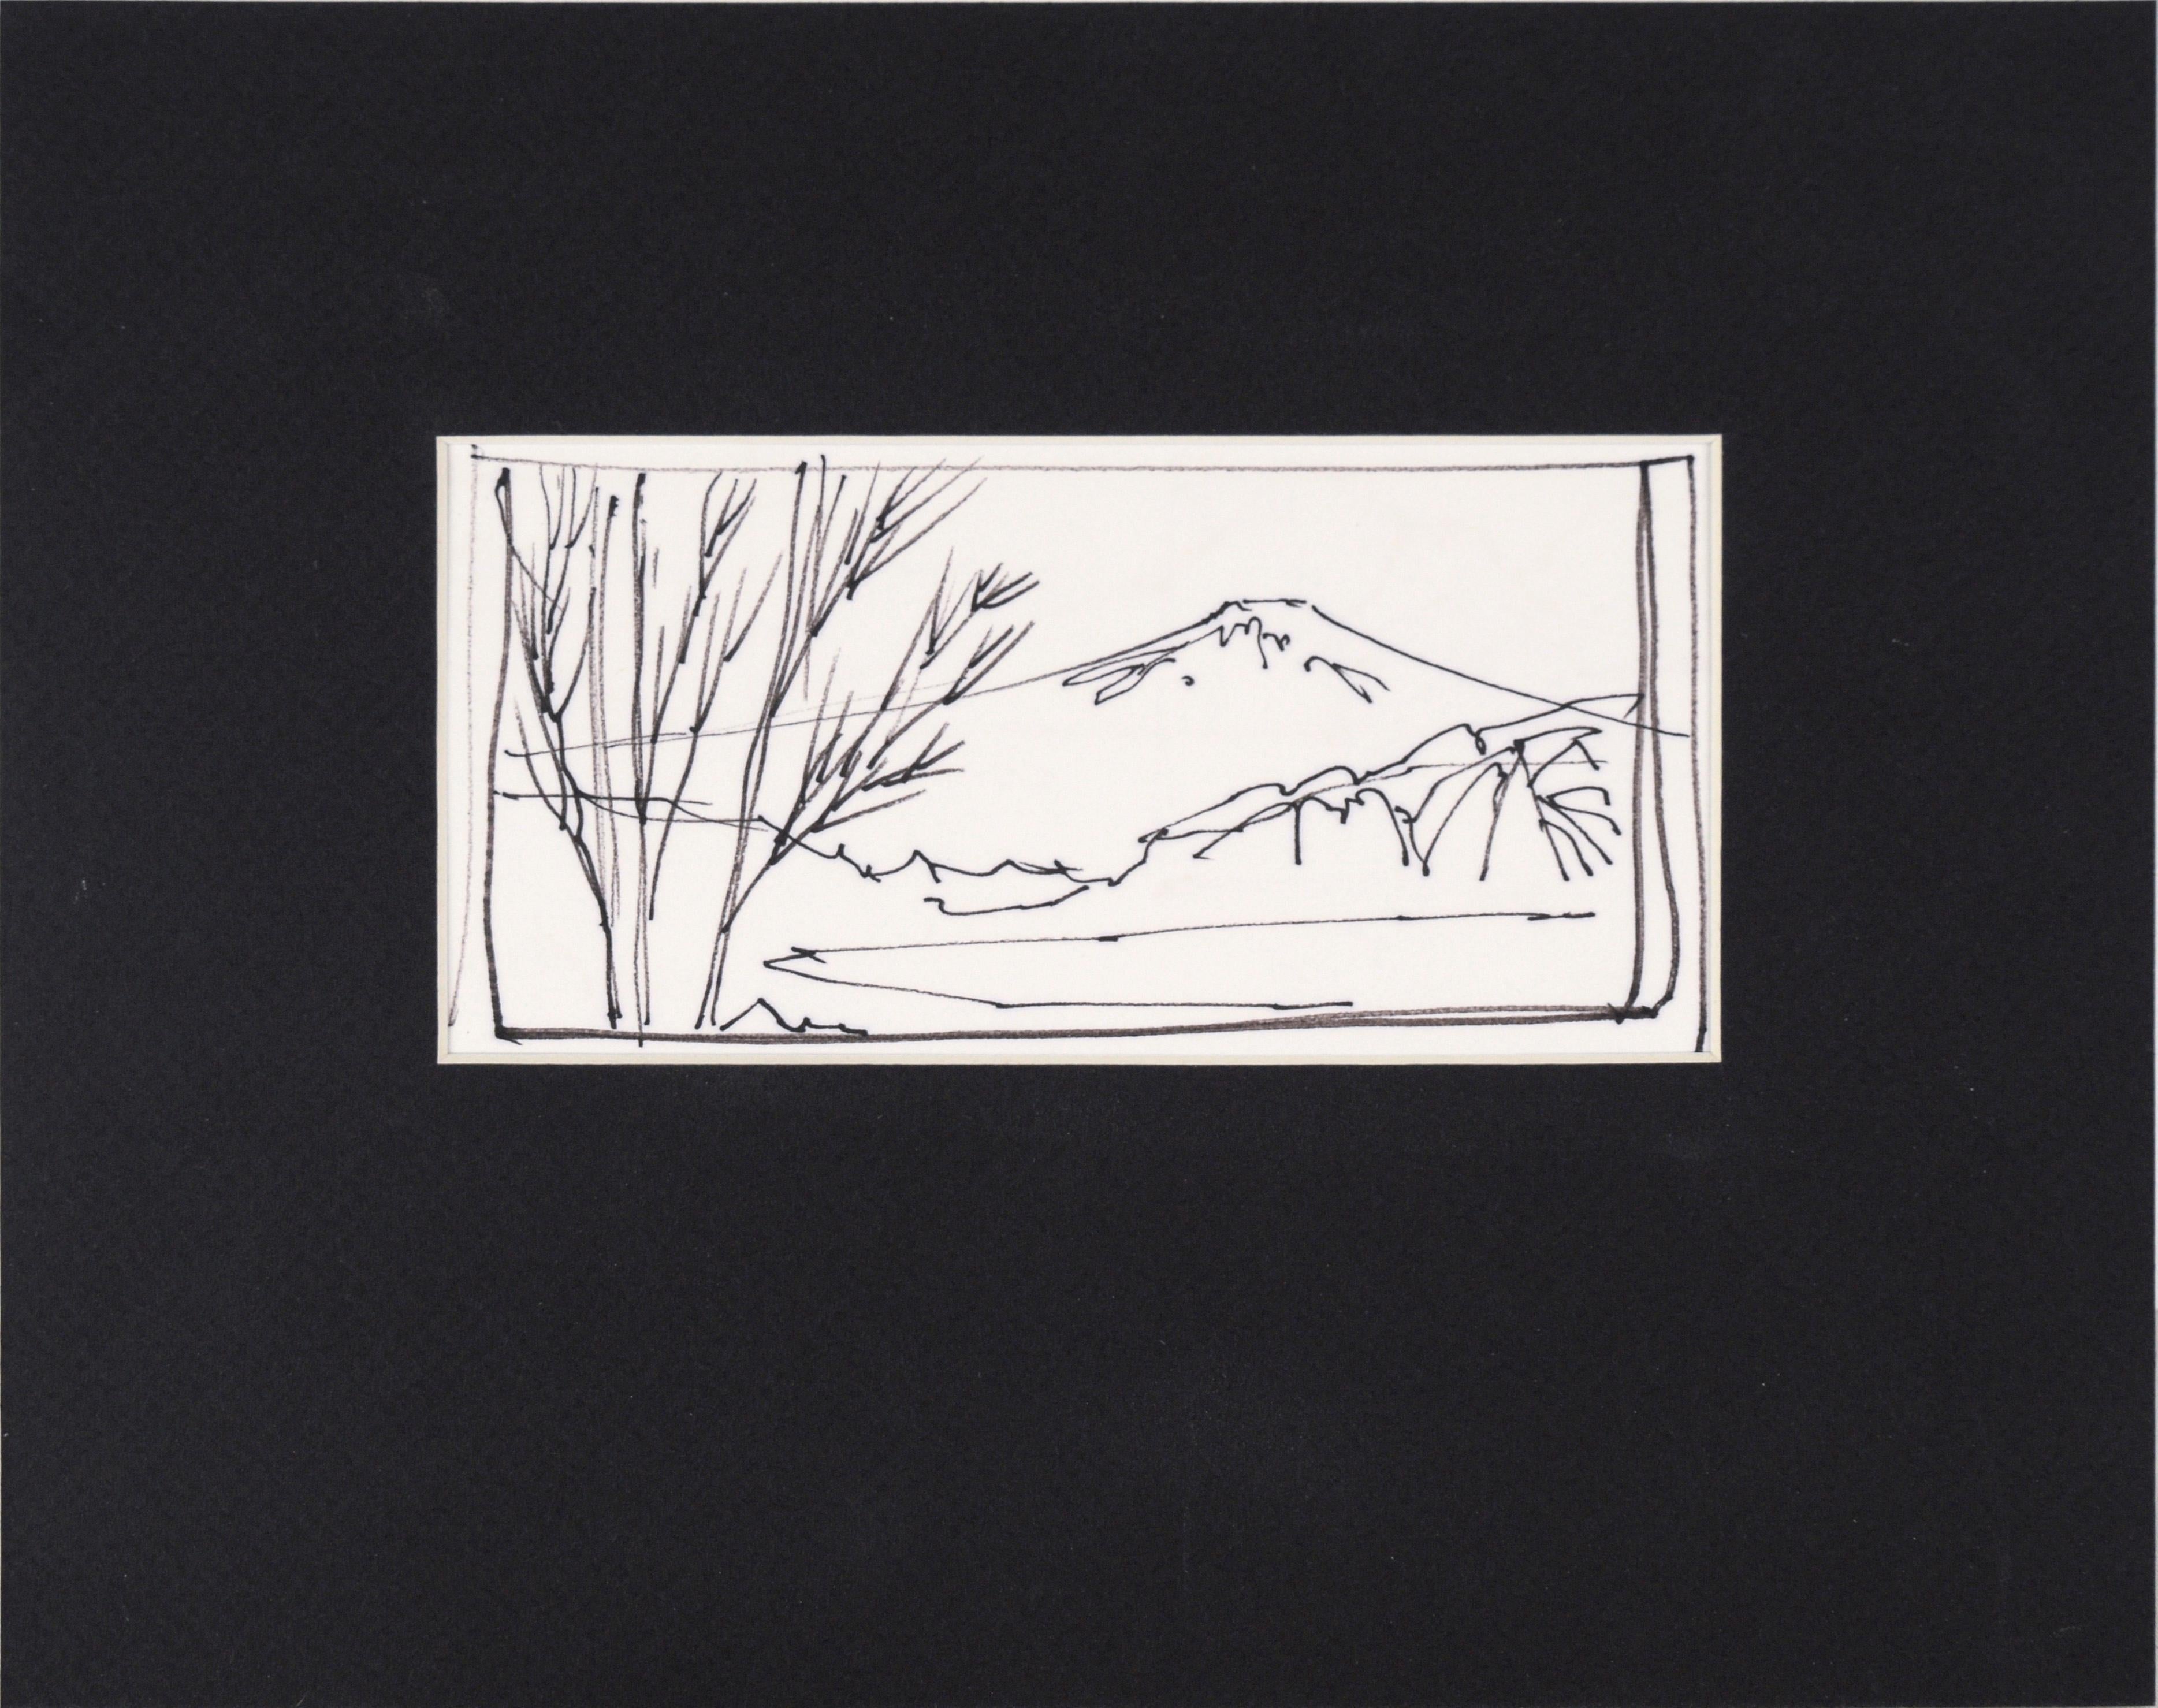 Snow-Capped Mountain Lake - Line Drawing Landscape in Ink on Paper